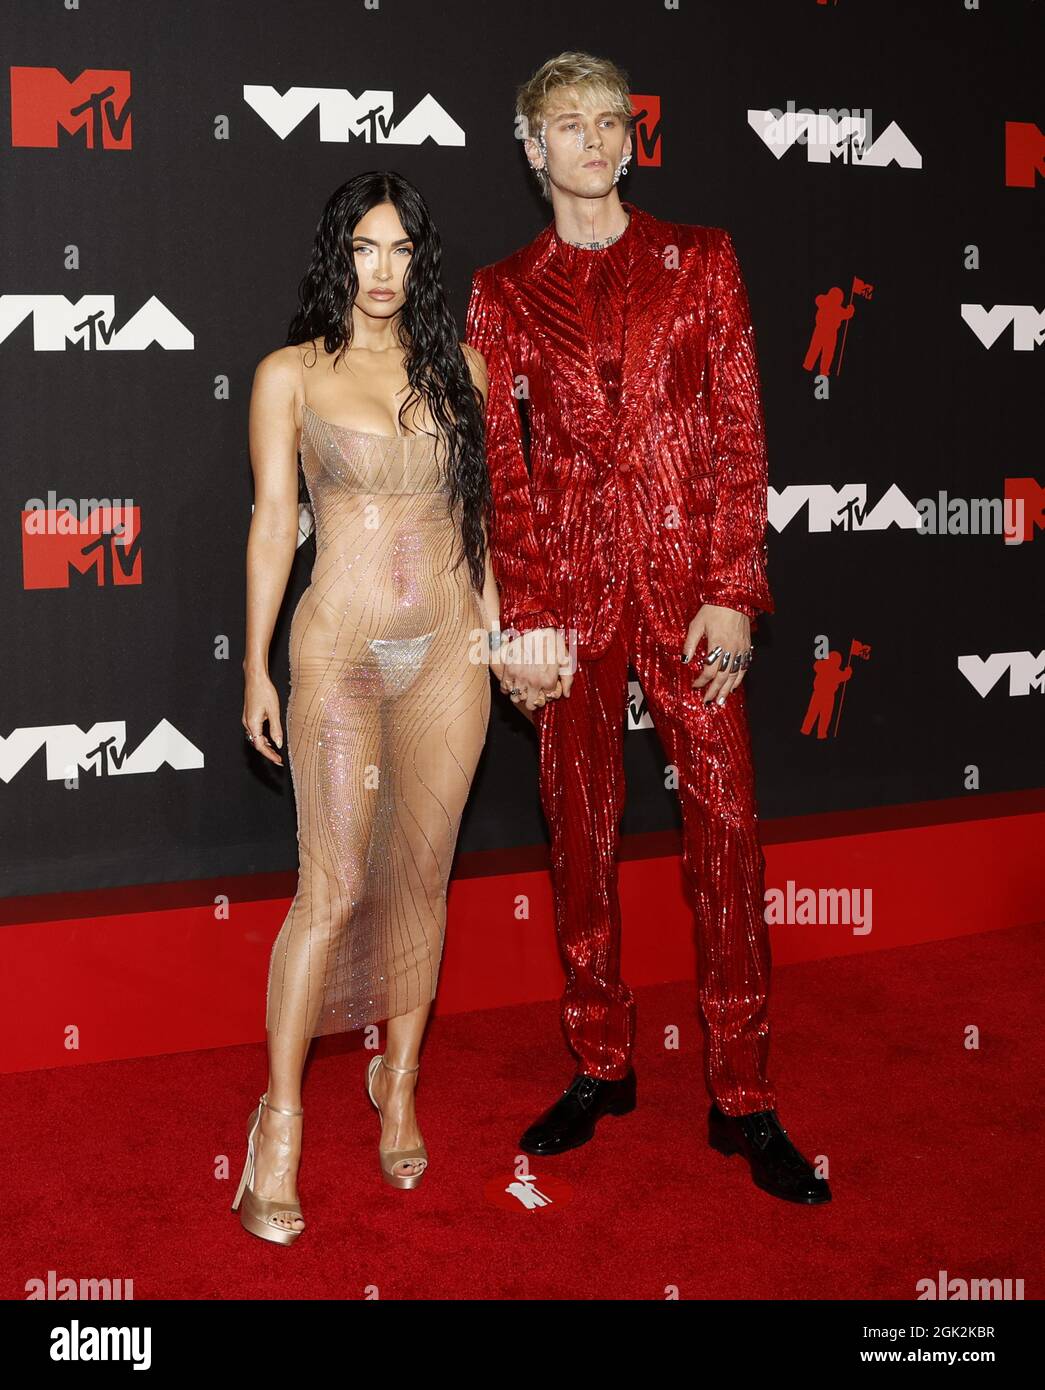 New York, United States. 13th Sep, 2021. Megan Fox and Machine Gun Kelly arrive on the red carpet at the 38th annual MTV Video Music Awards at Barclays Center in New York City on Sunday, September 12, 2021. Photo by John Angelillo/UPI Credit: UPI/Alamy Live News Stock Photo